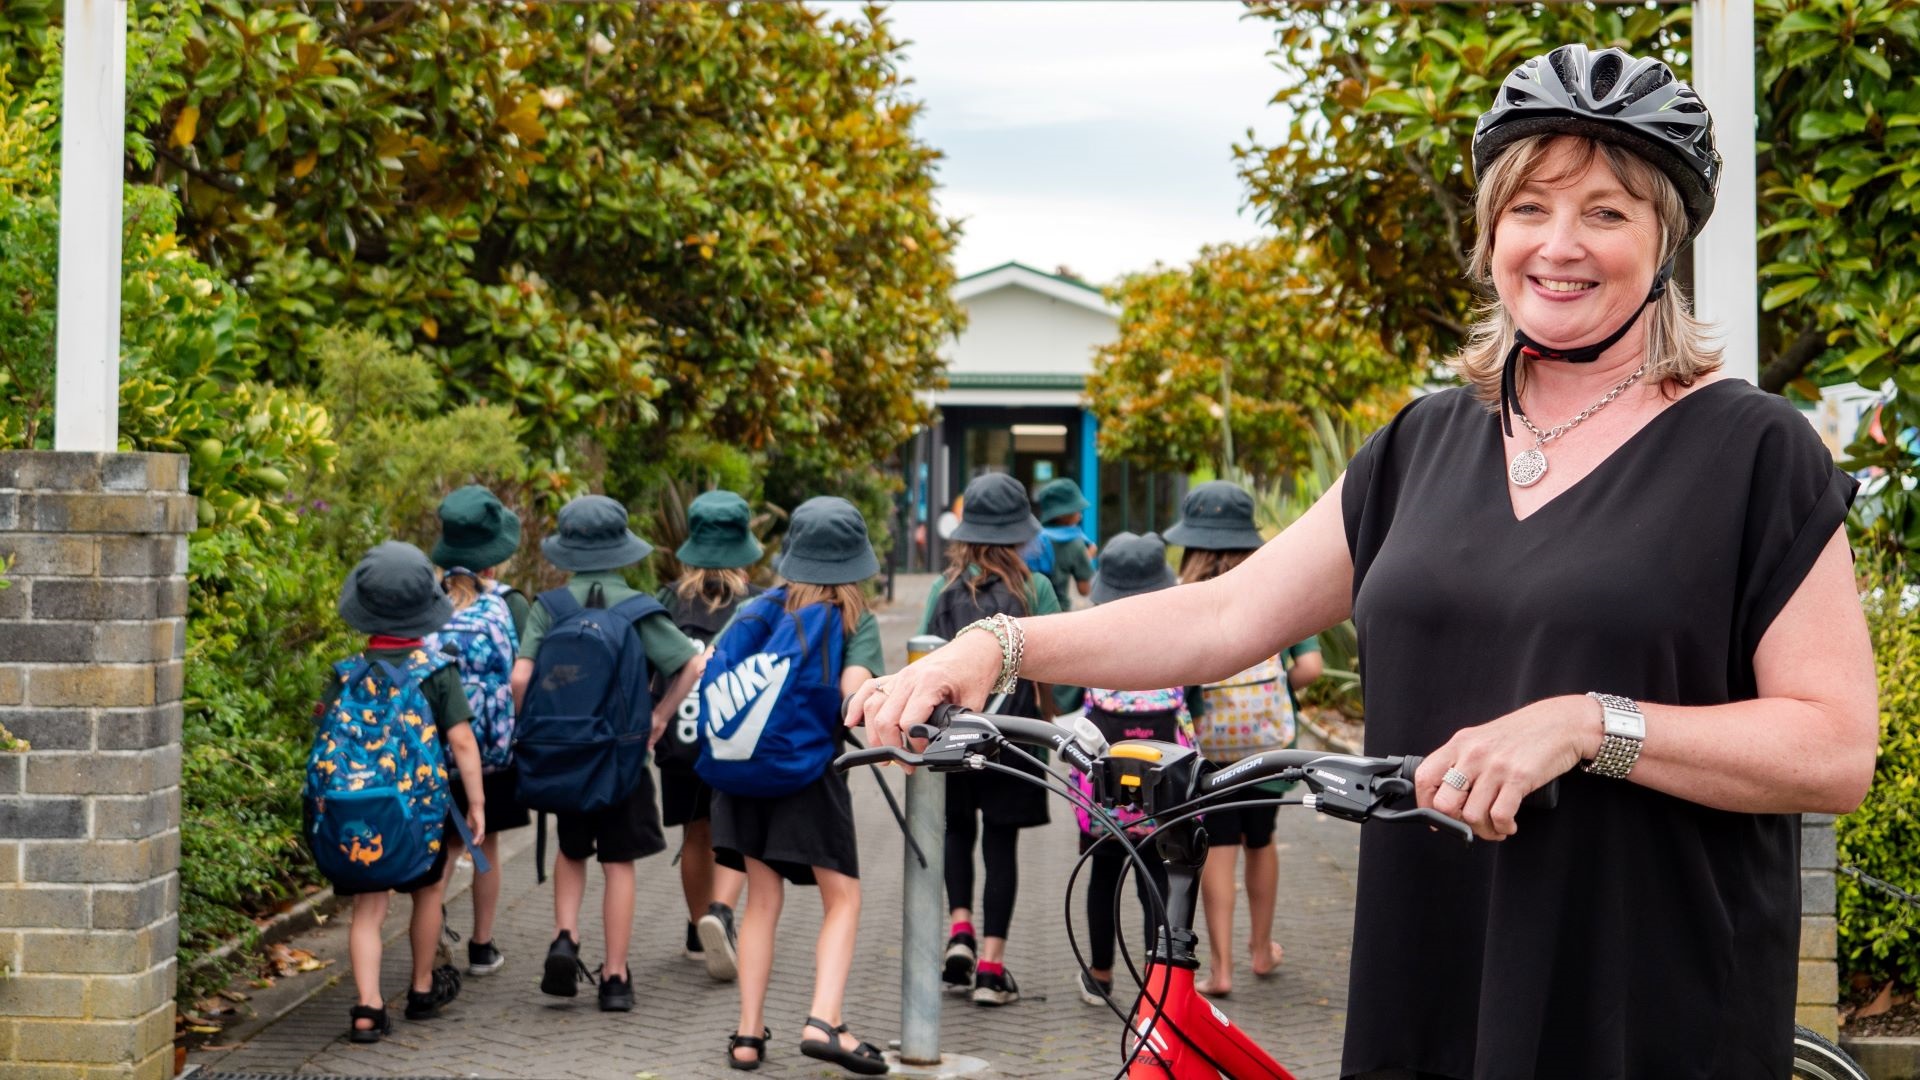 Photo shows smiling woman on bike at Cloverlea School gate with students in the background walking towards their classroom.